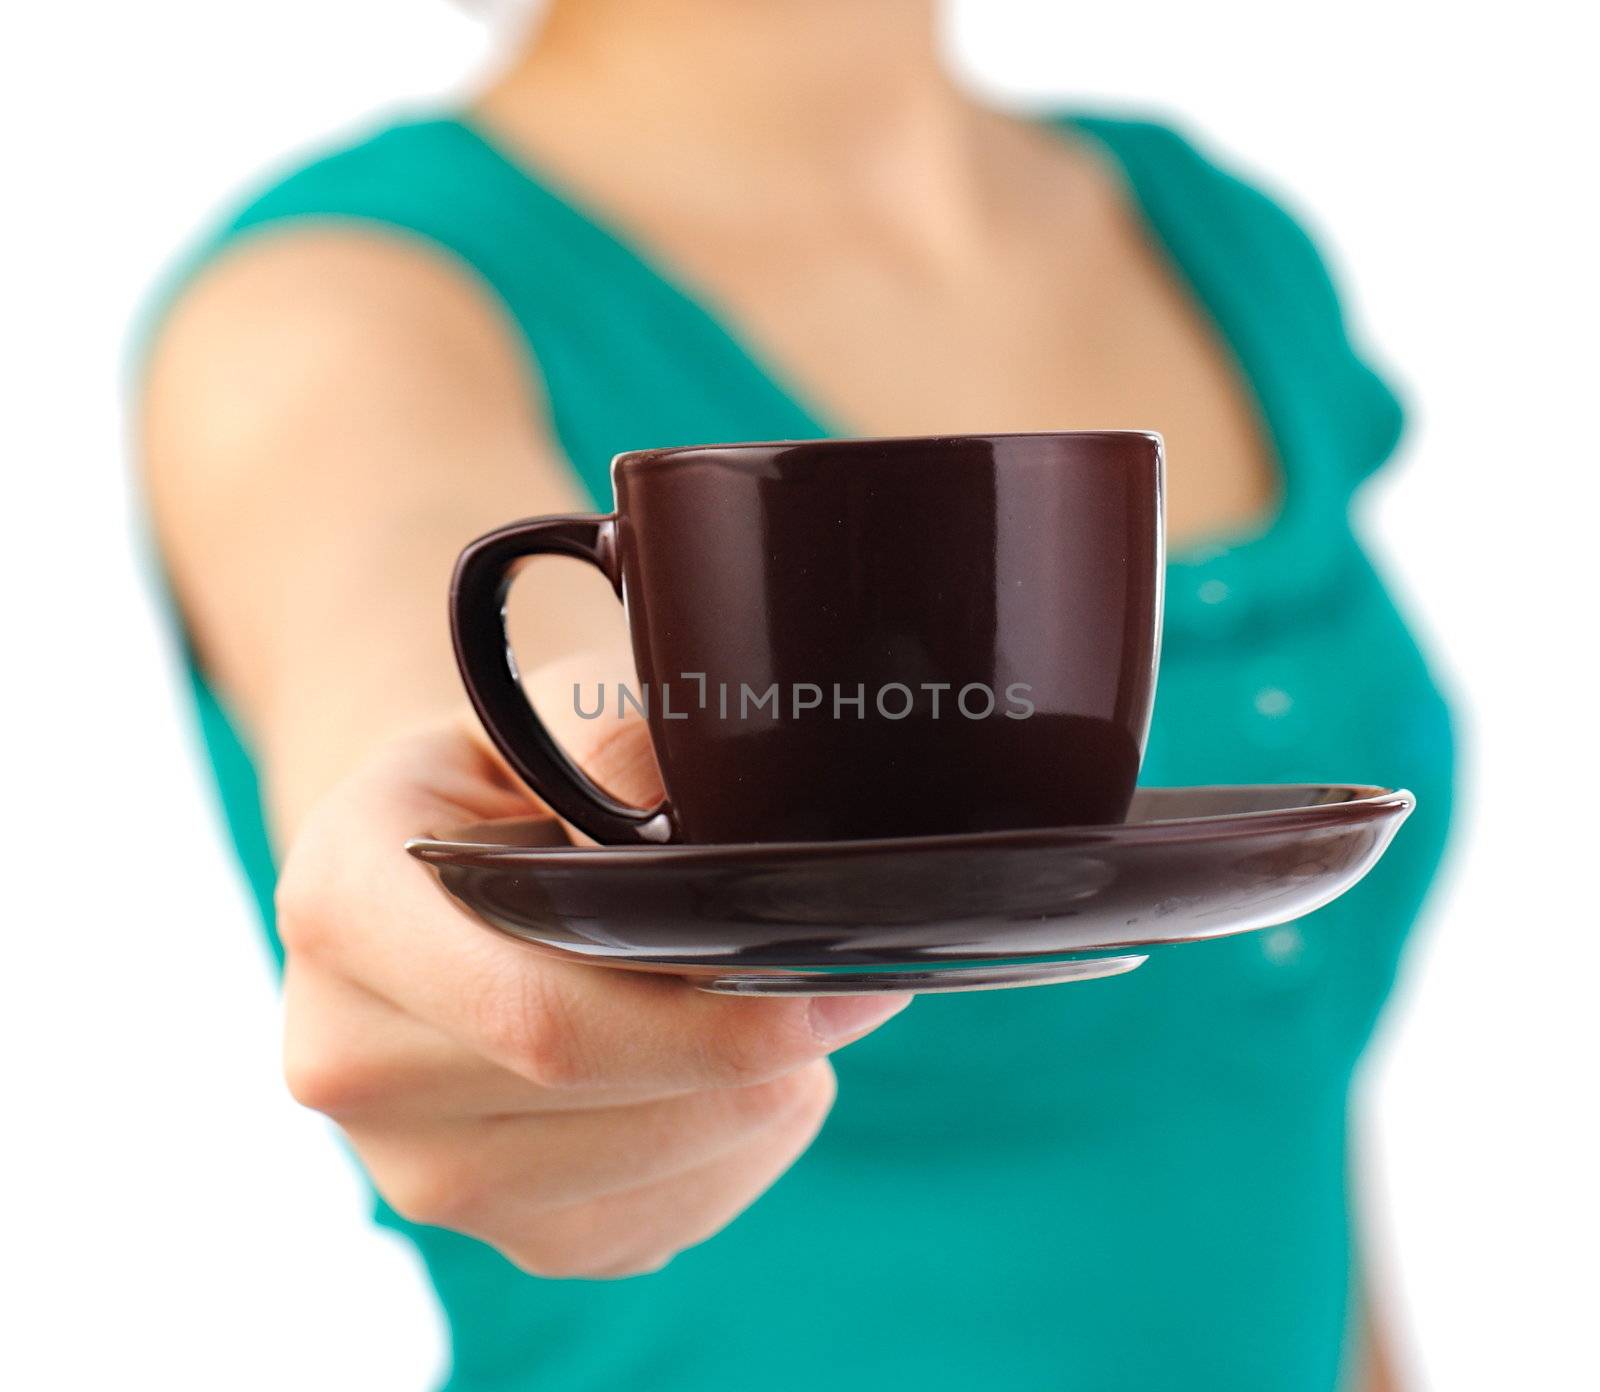  Waitress serving you a coffee. Iconic simple image. Isolated on white background. Shallow depth of field, focus on cup.